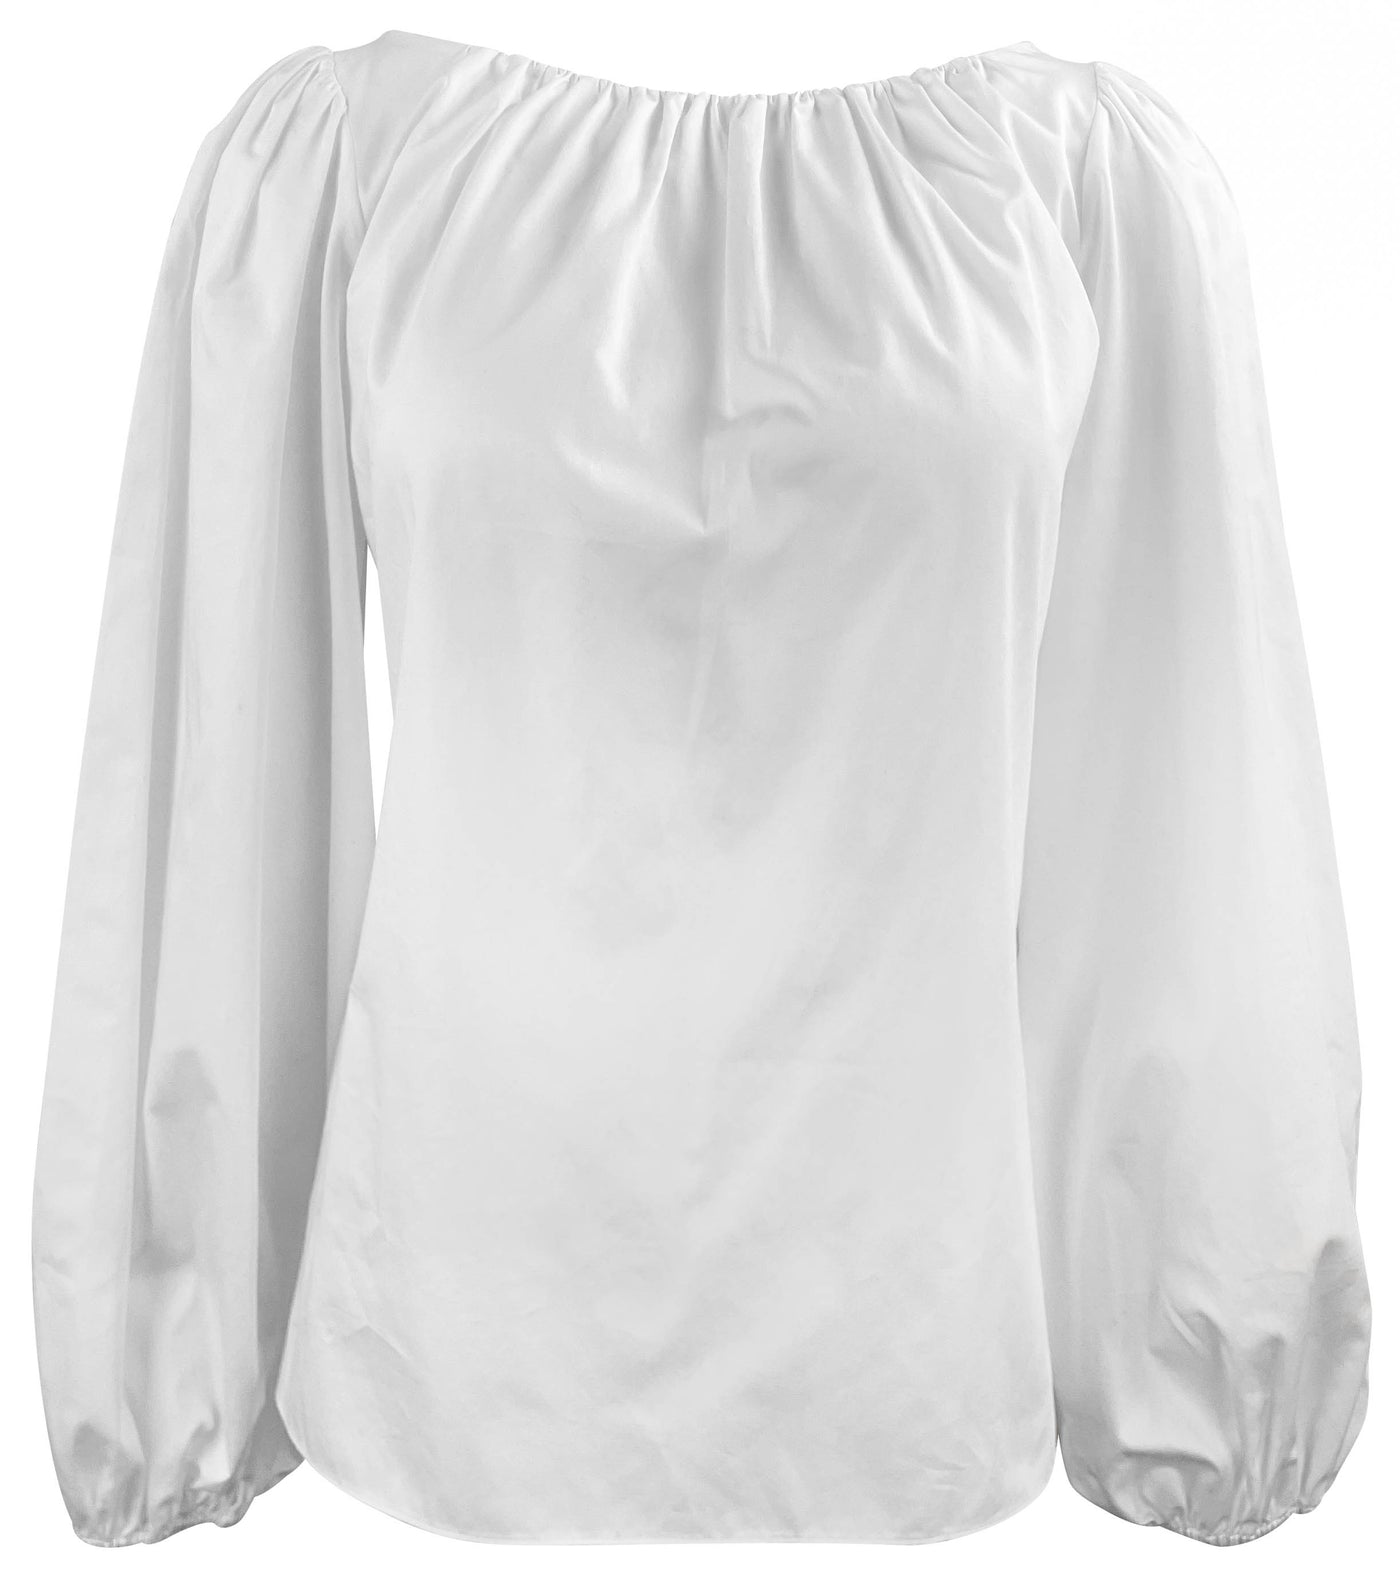 Adam Lippes Boat Neck Blouse in White - Discounts on Adam Lippes at UAL